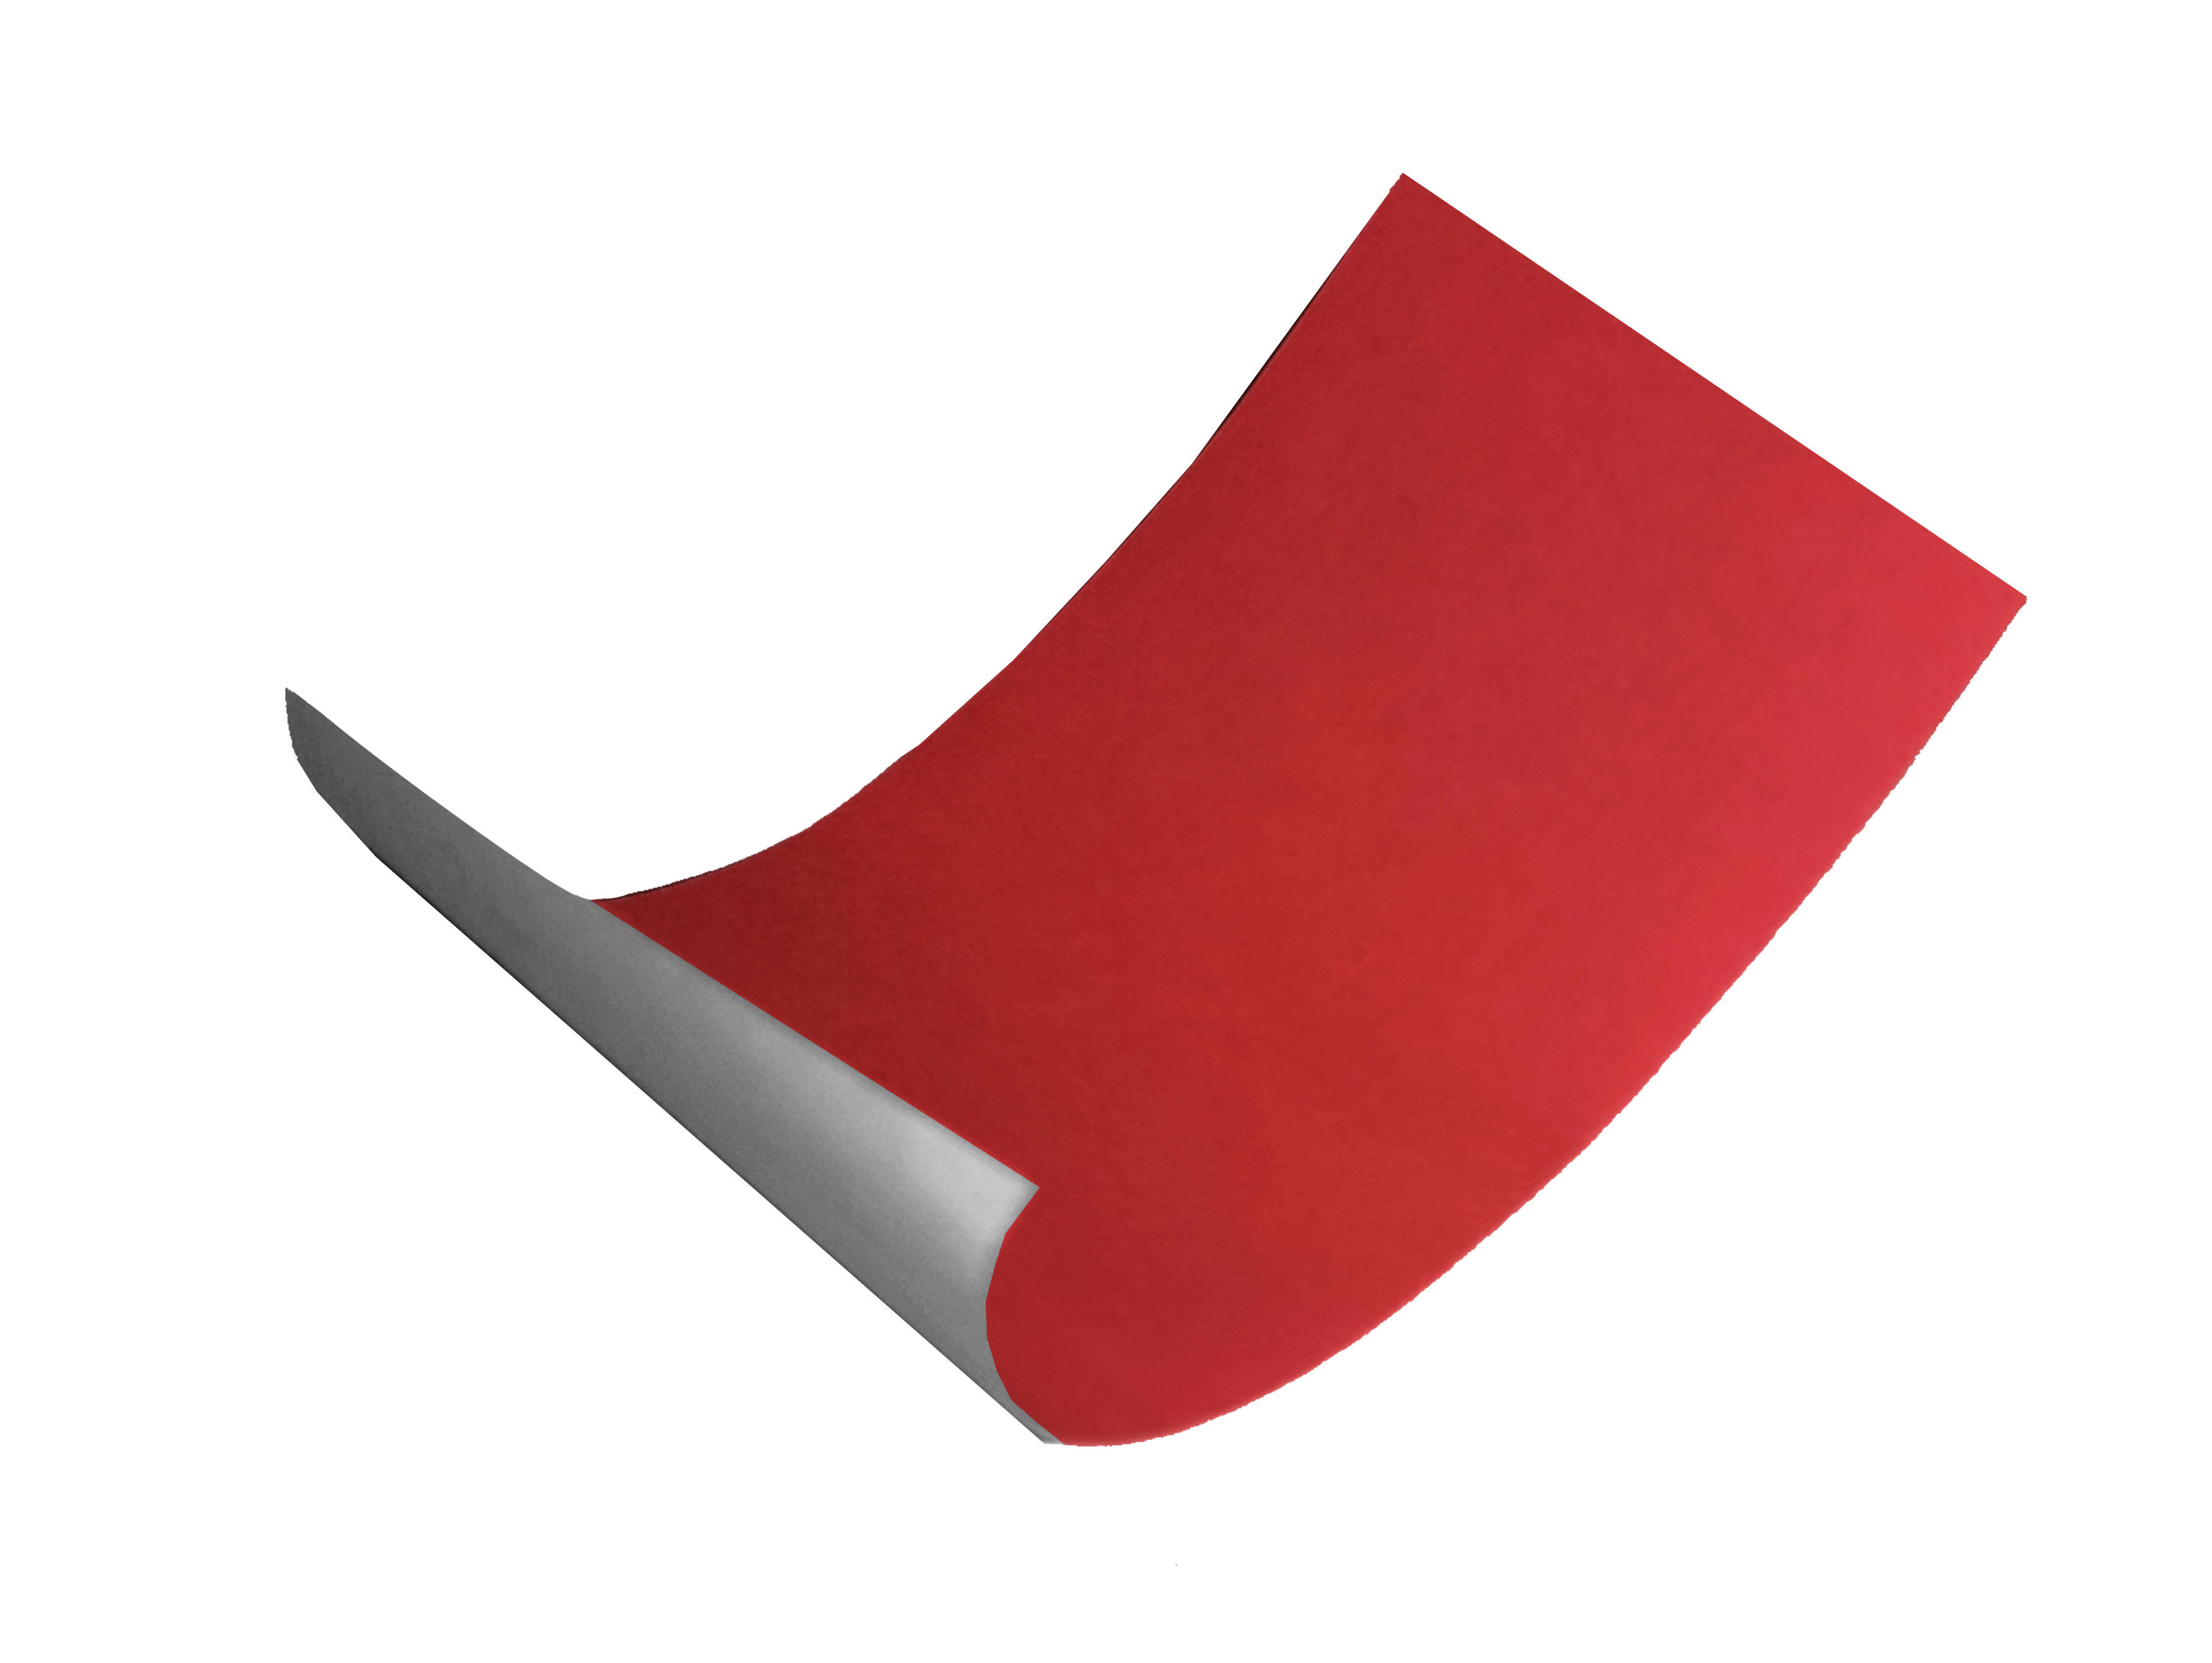 An unrolled piece of red paper